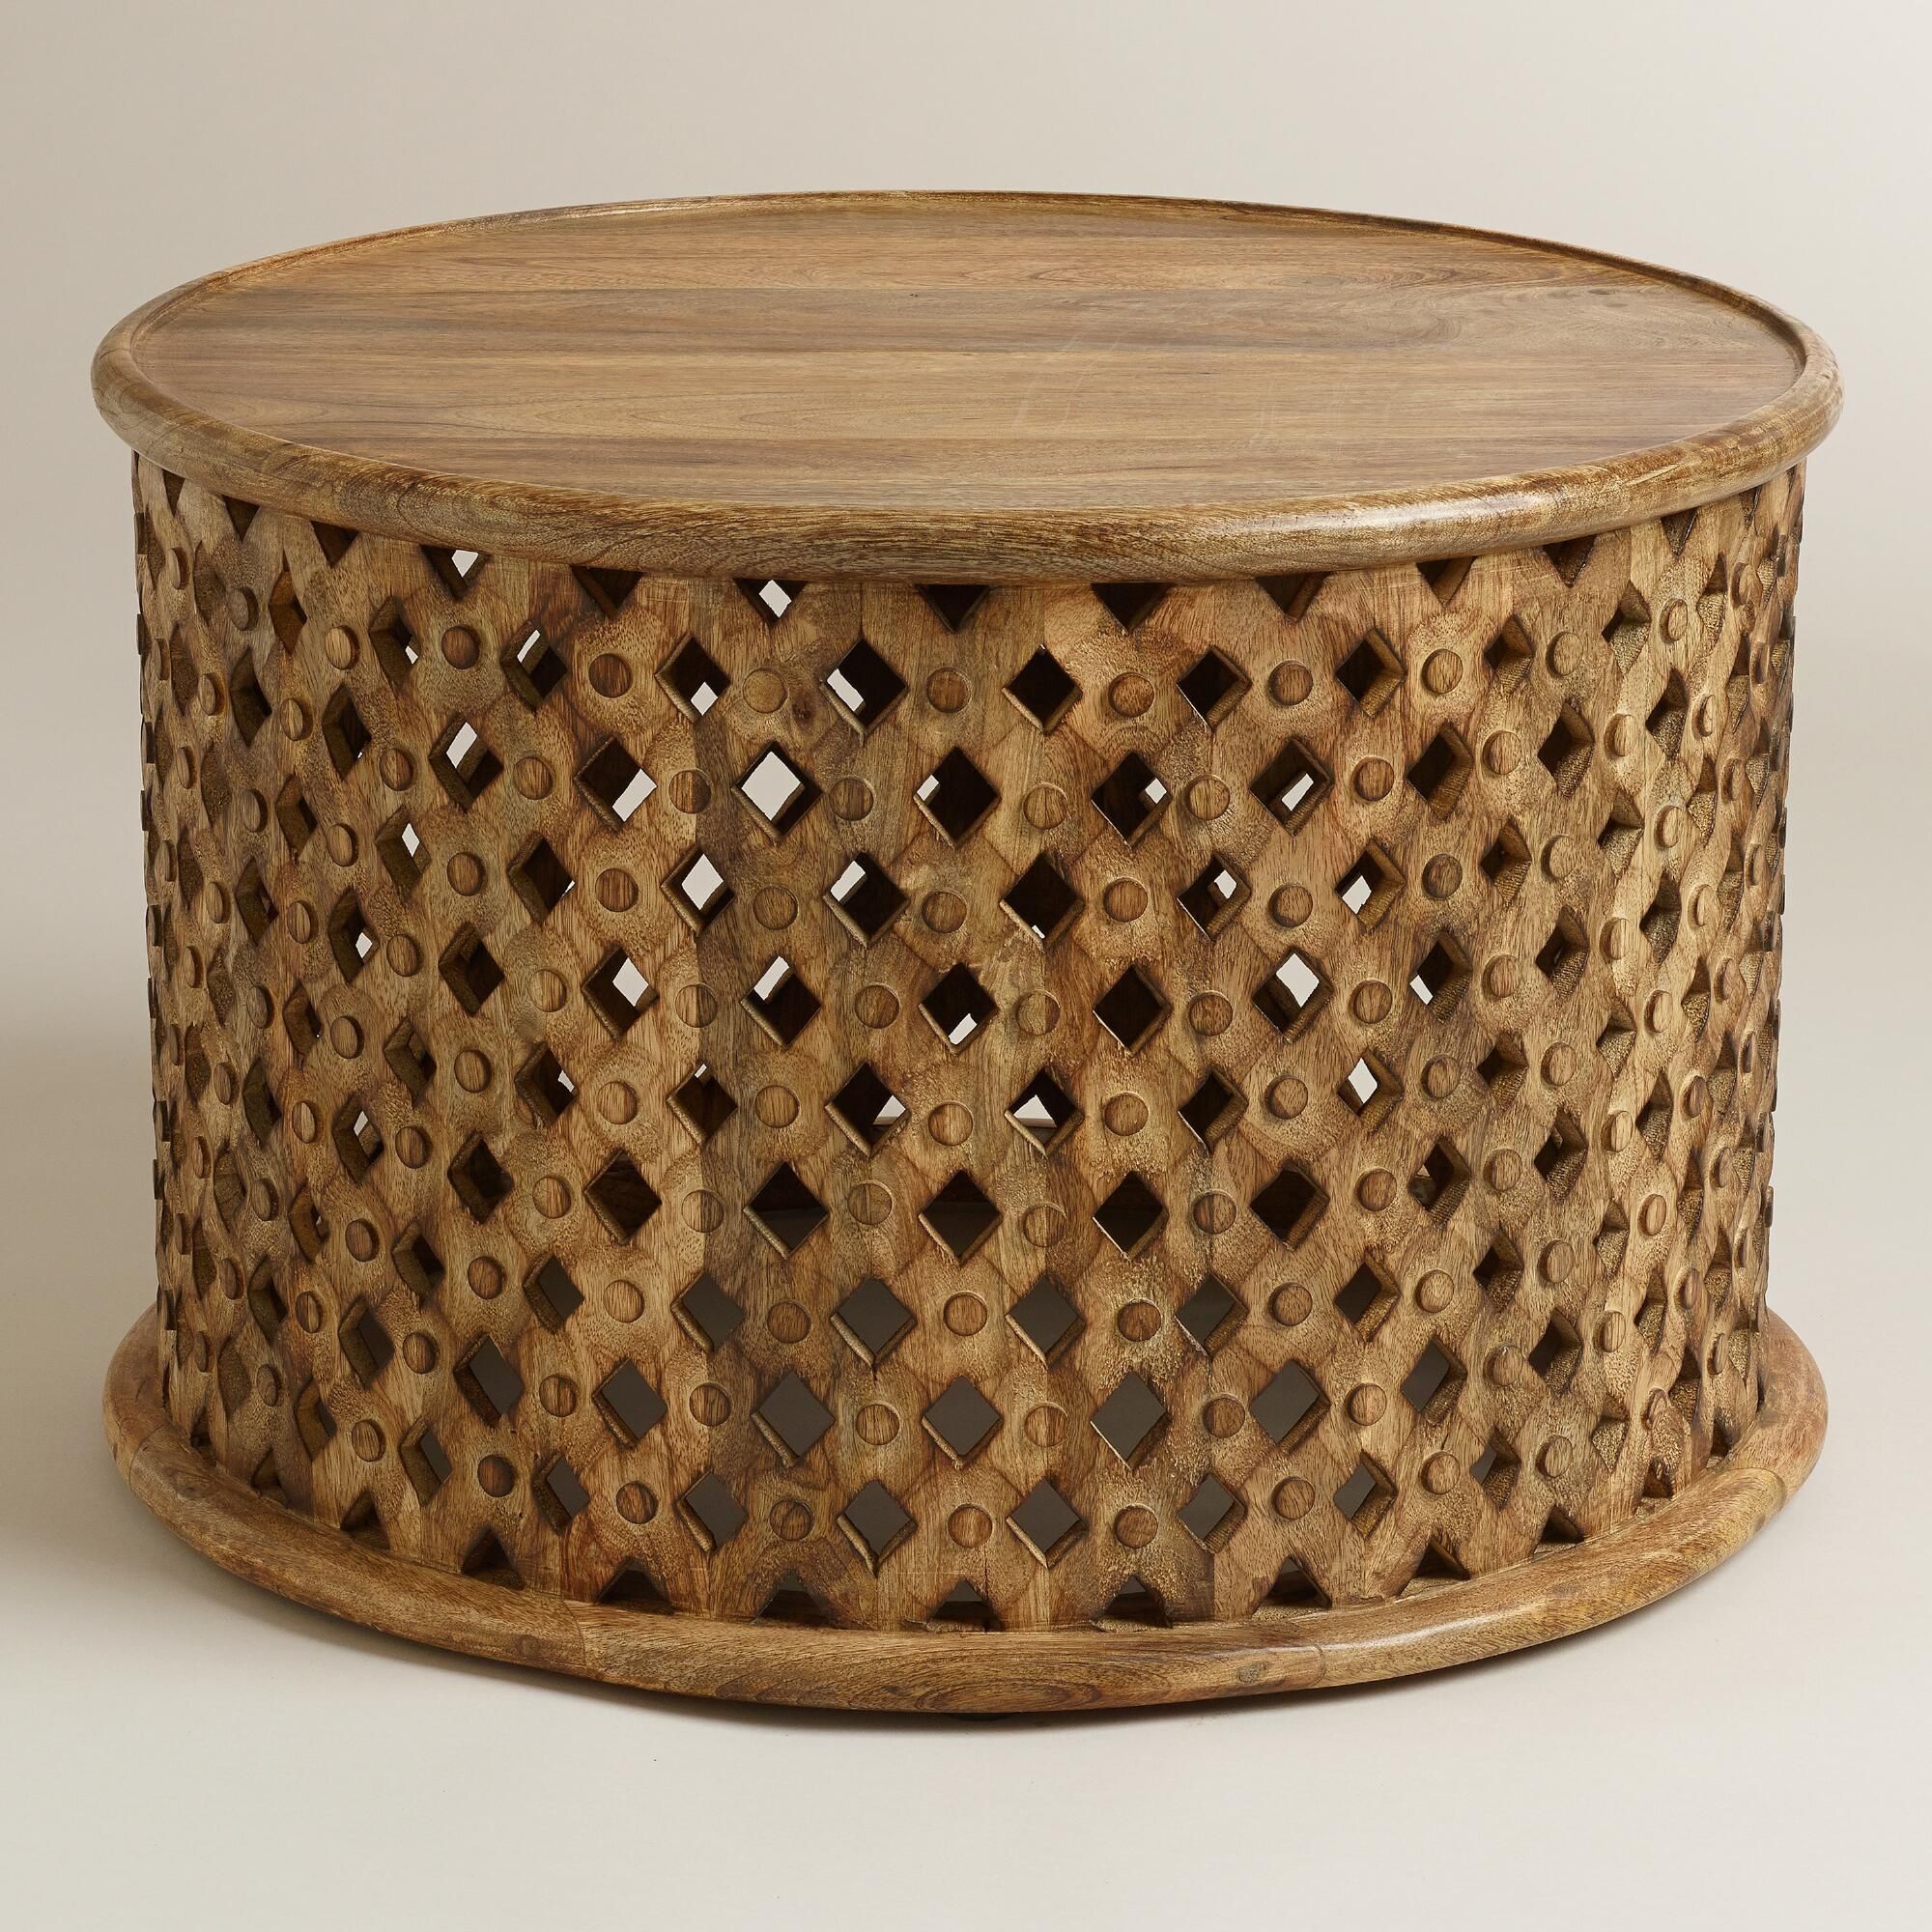 Carved Wood Coffee Table | Furniture Design For Round Carved Wood Coffee Tables (View 4 of 30)